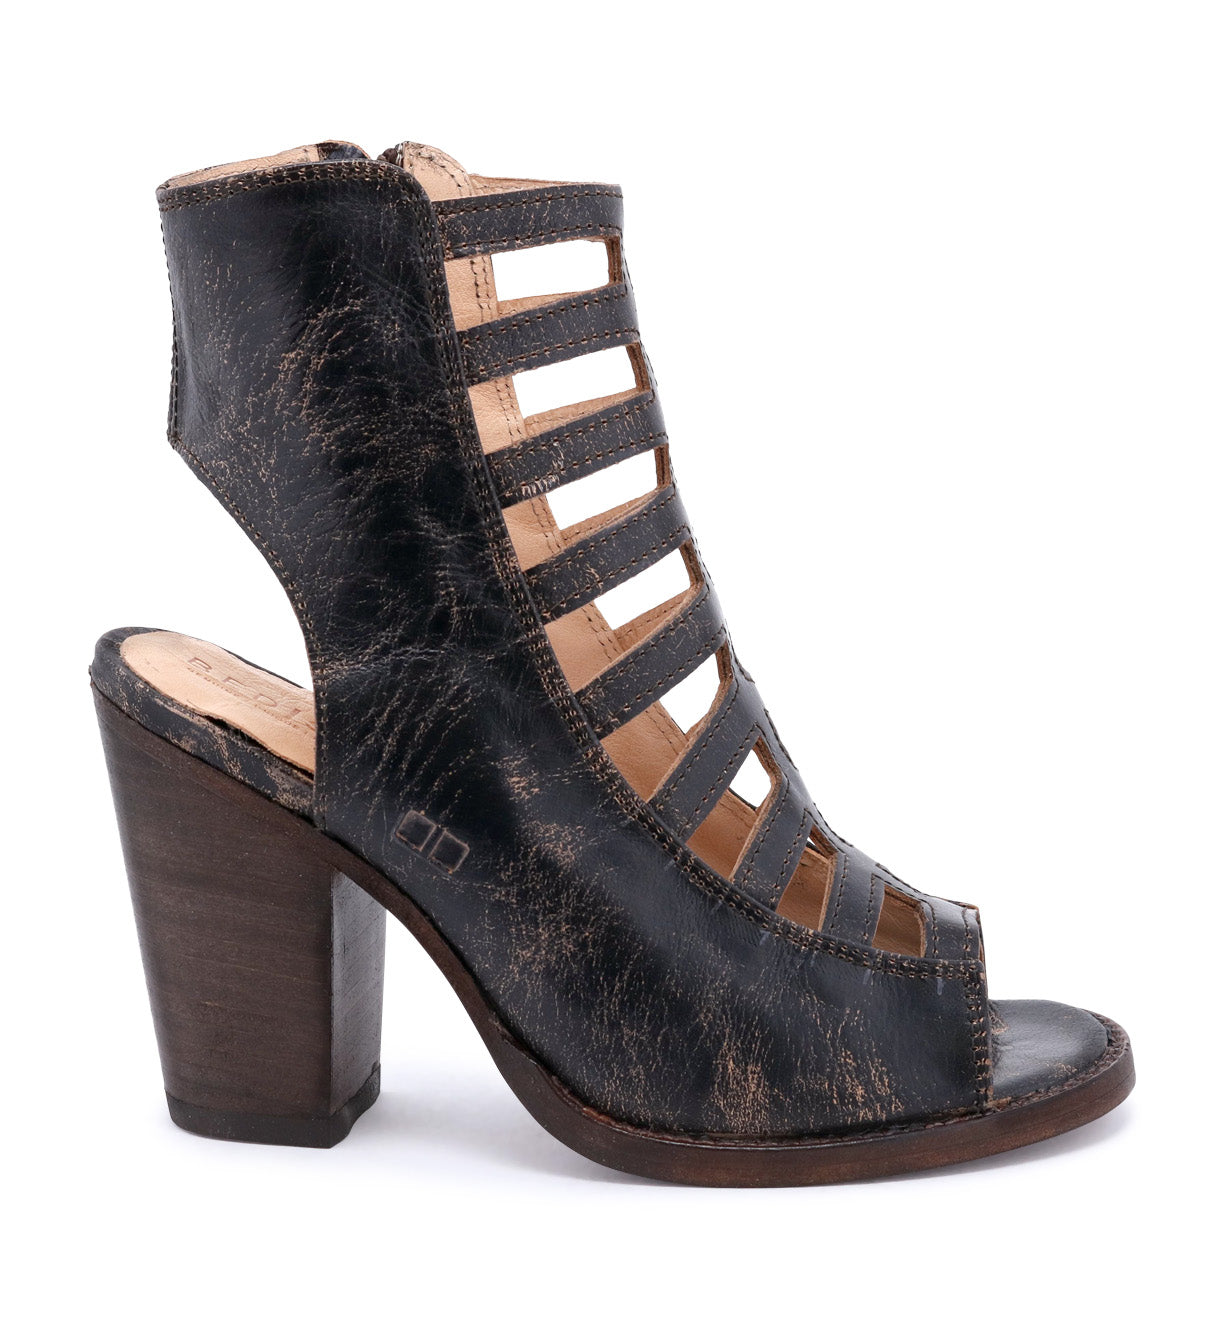 A women's black heeled sandal with a wooden heel, called "Occam" by Bed Stu.